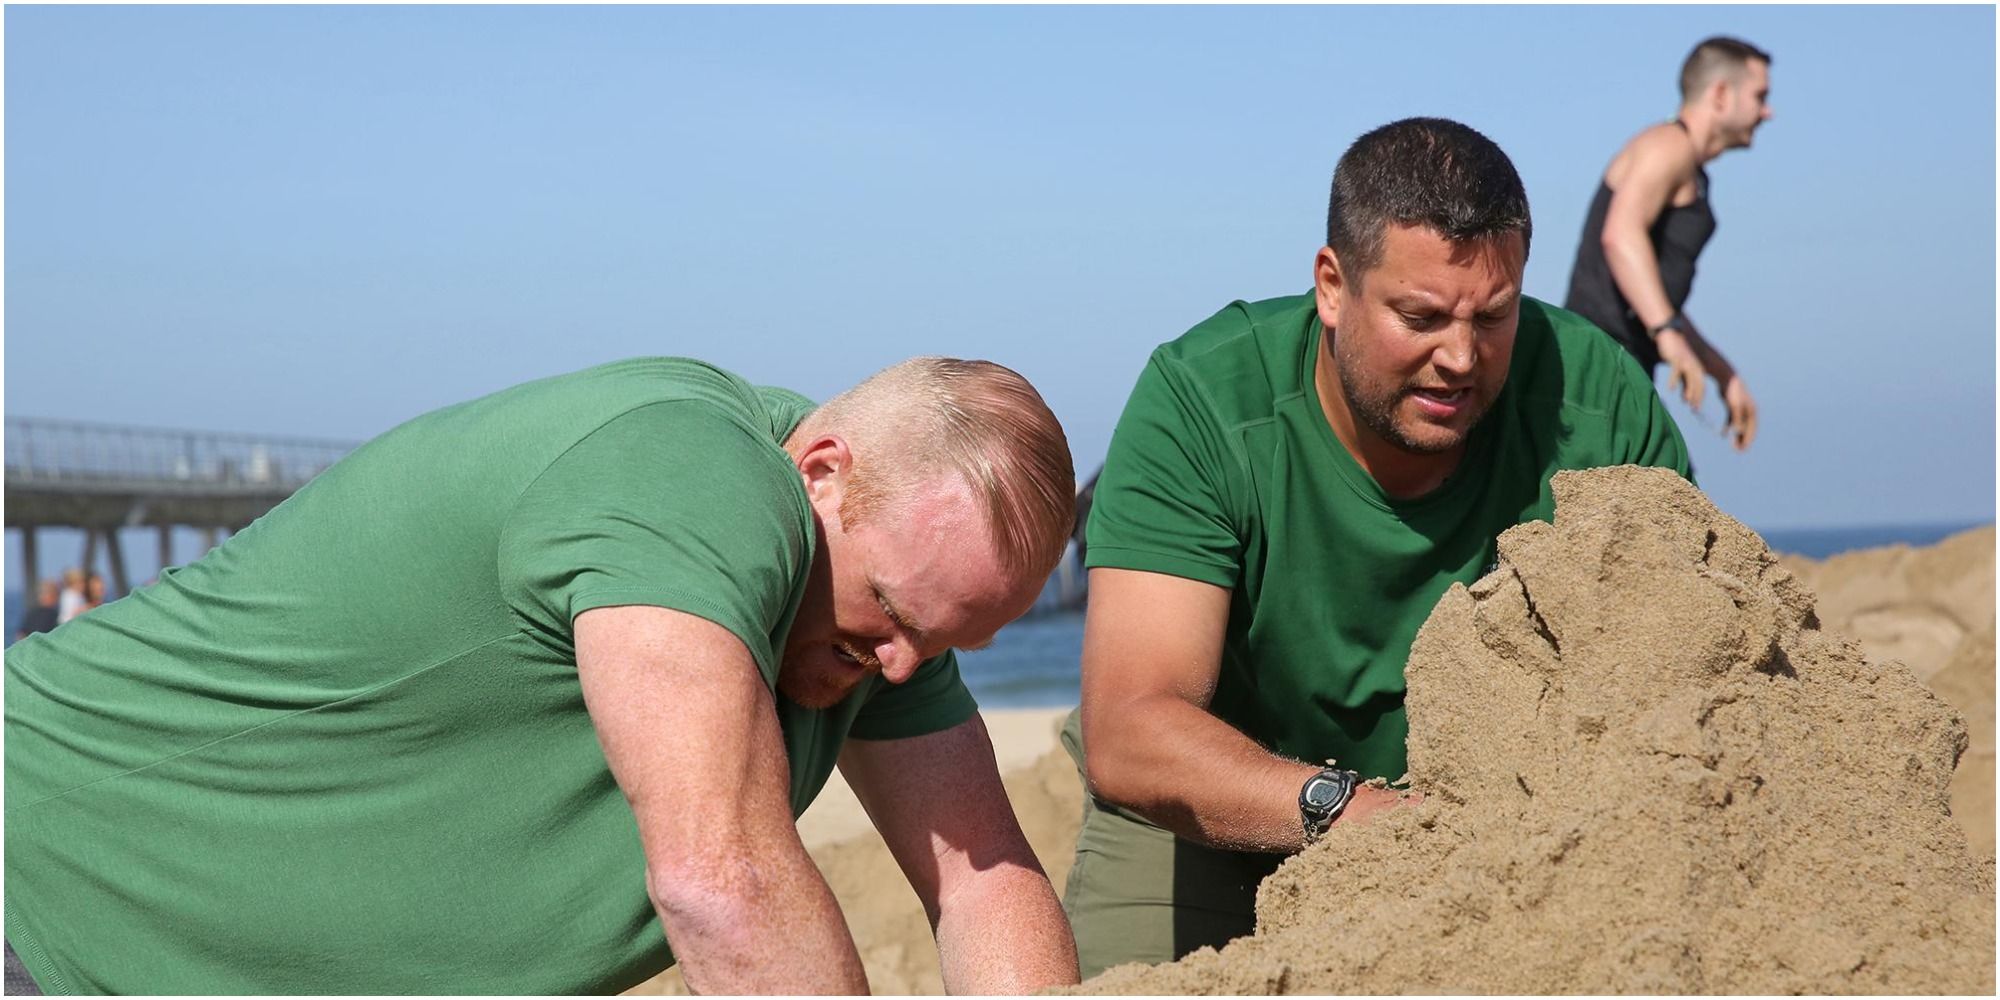 chris hammons and bret labelle with their hands on the sand